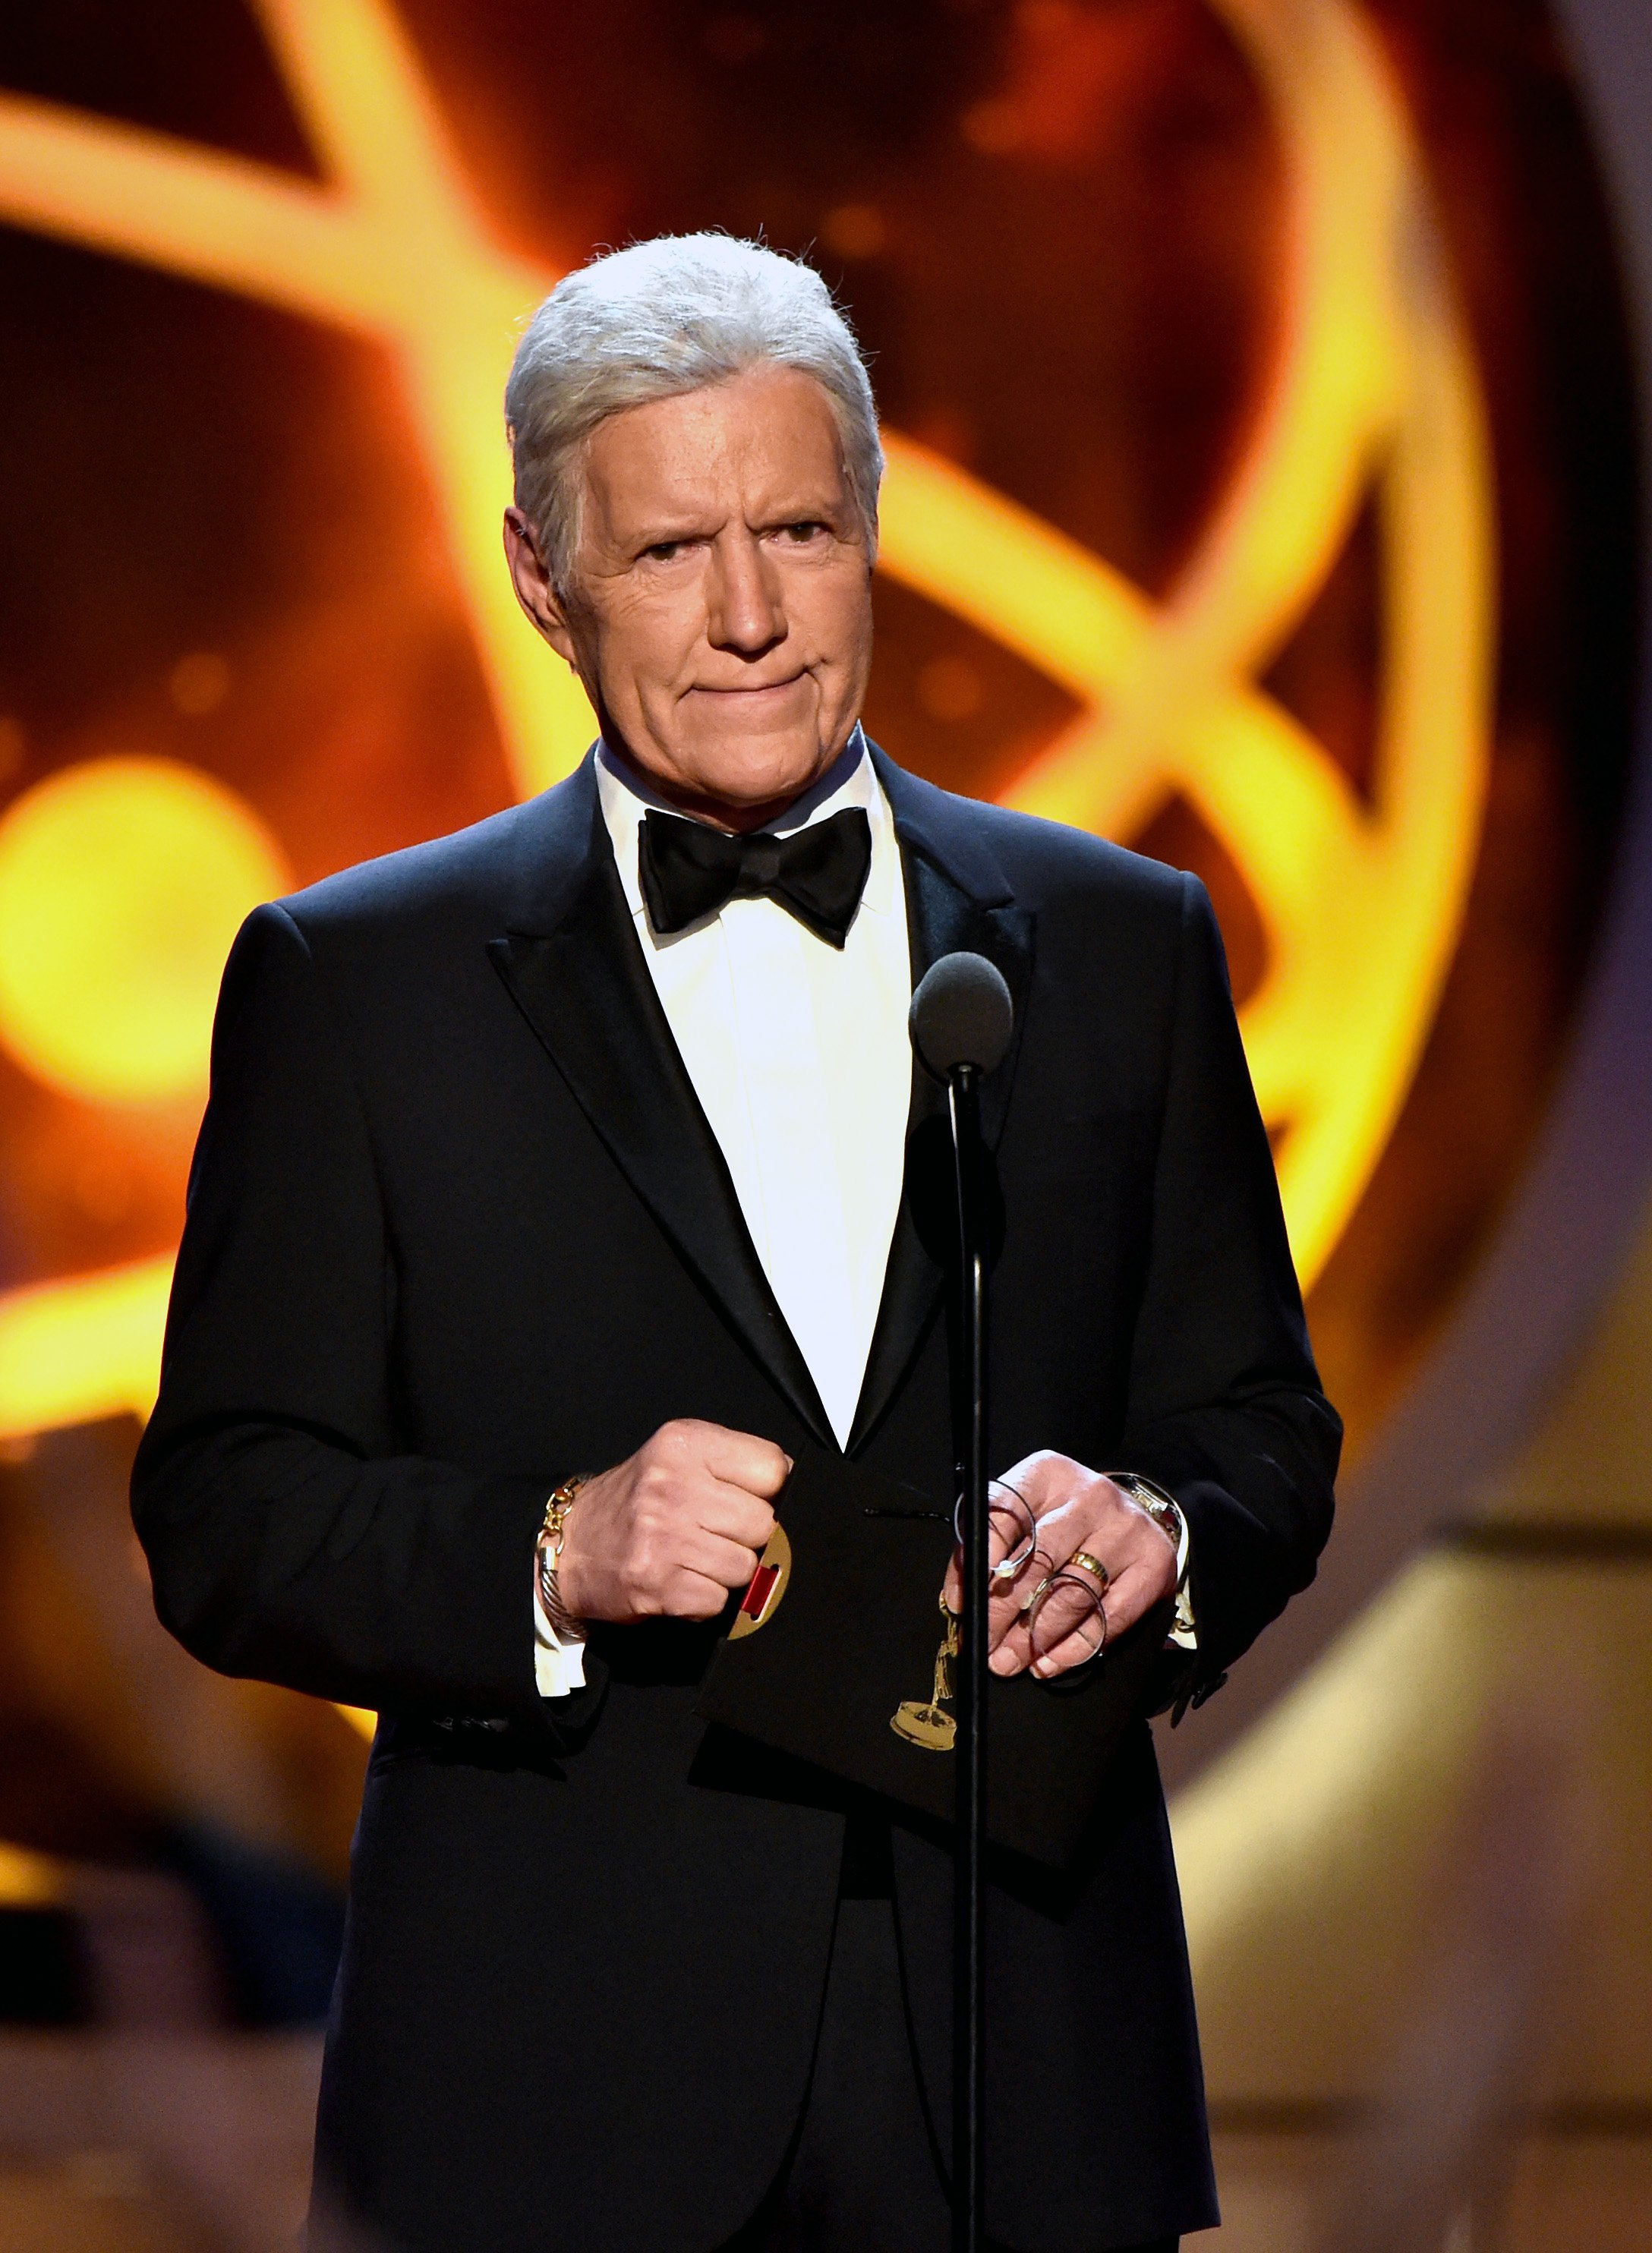 Alex Trebek onstage at the annual Daytime Emmy Awards in Pasadena, California on May 5, 2019 | Photo: Getty Images